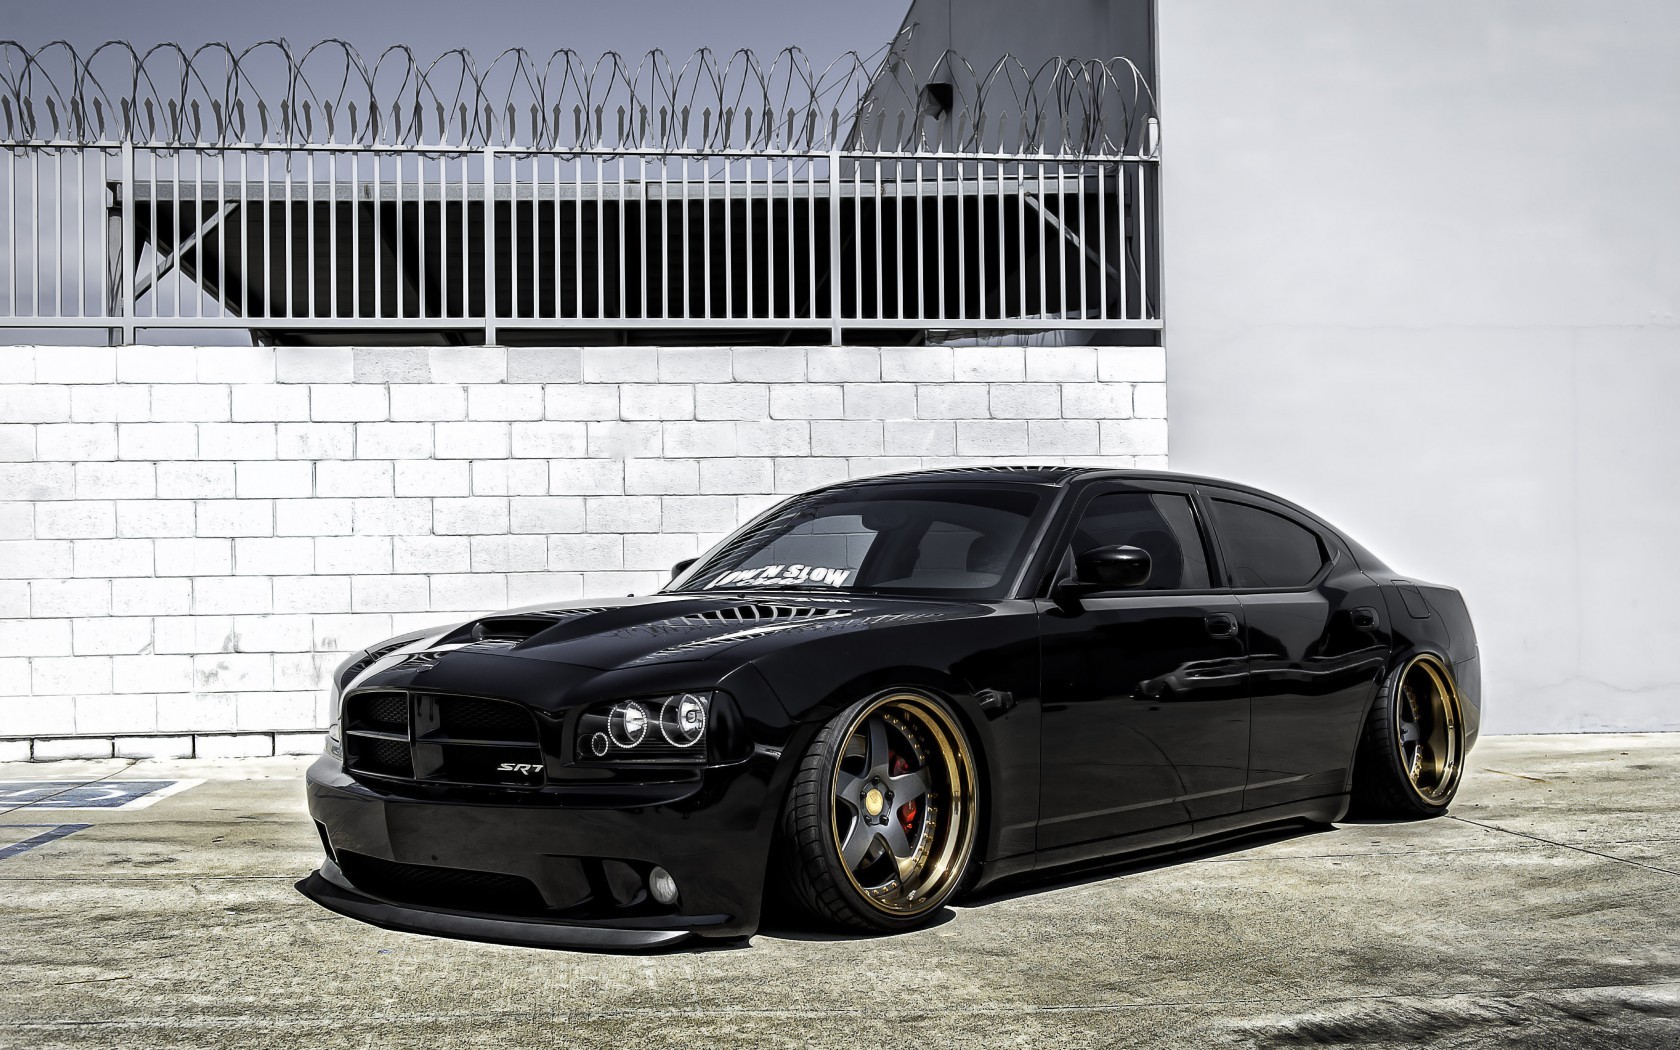 General 1680x1050 car black cars vehicle Dodge Dodge Charger stanced muscle cars American cars Stellantis